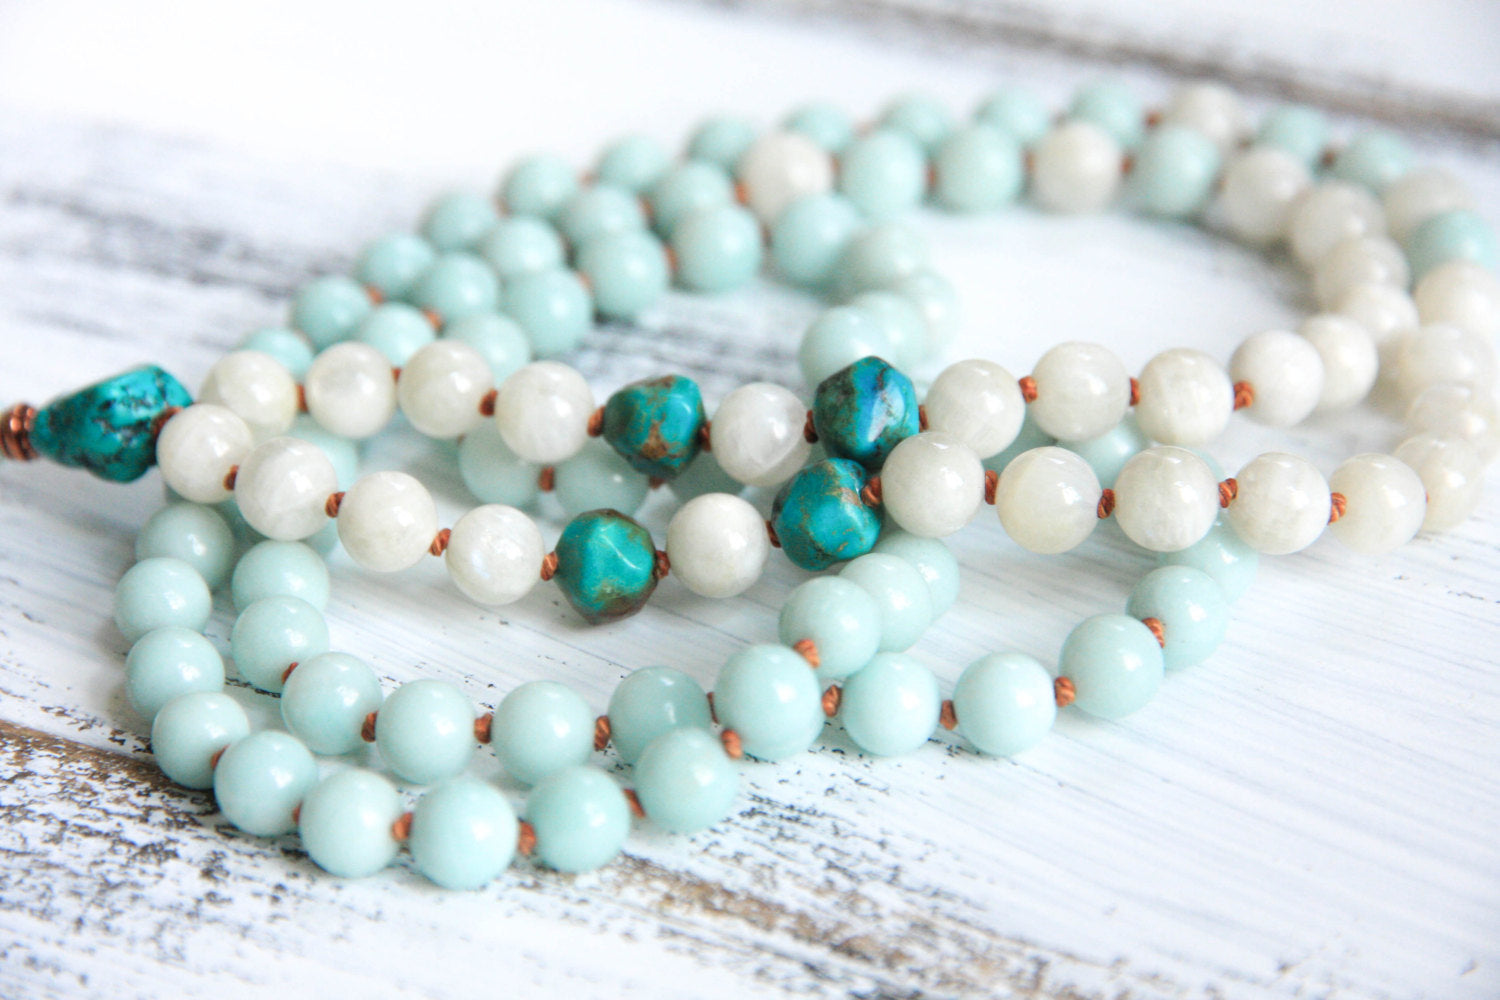 Buy Green Angelite Beads for Mala Necklaces!